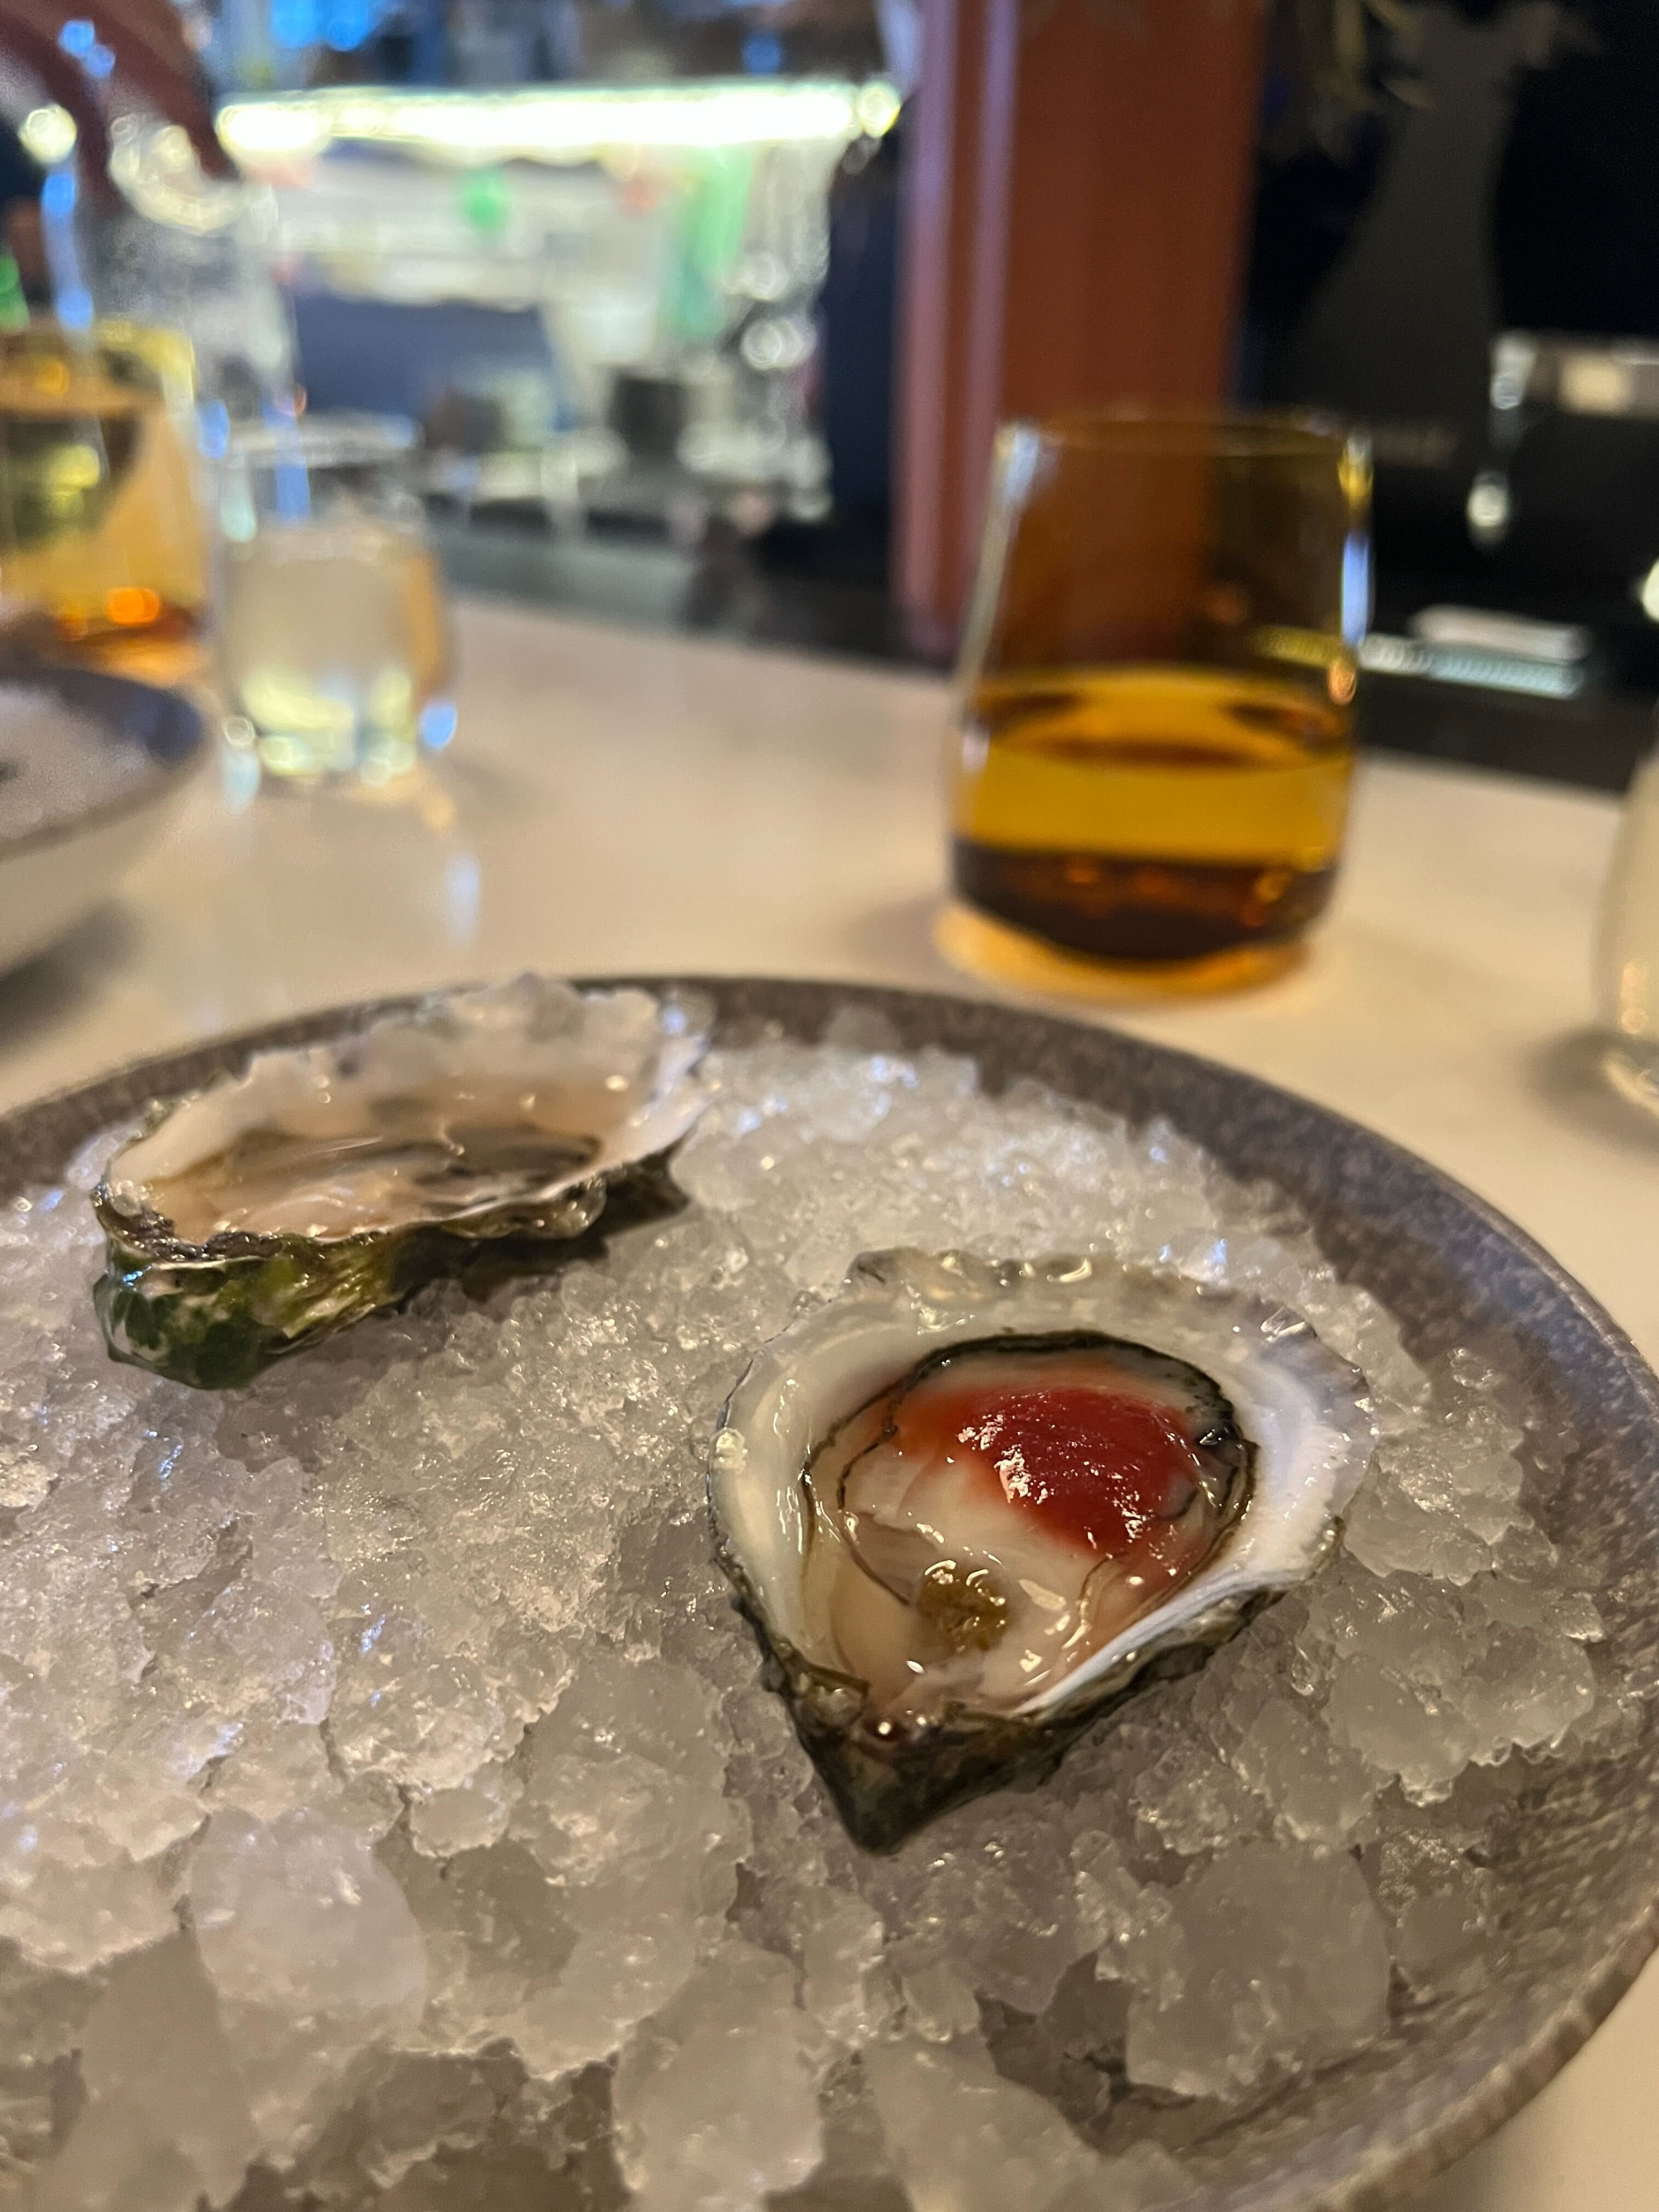 Mink’s duo oysters that come with the chef’s tasting menu